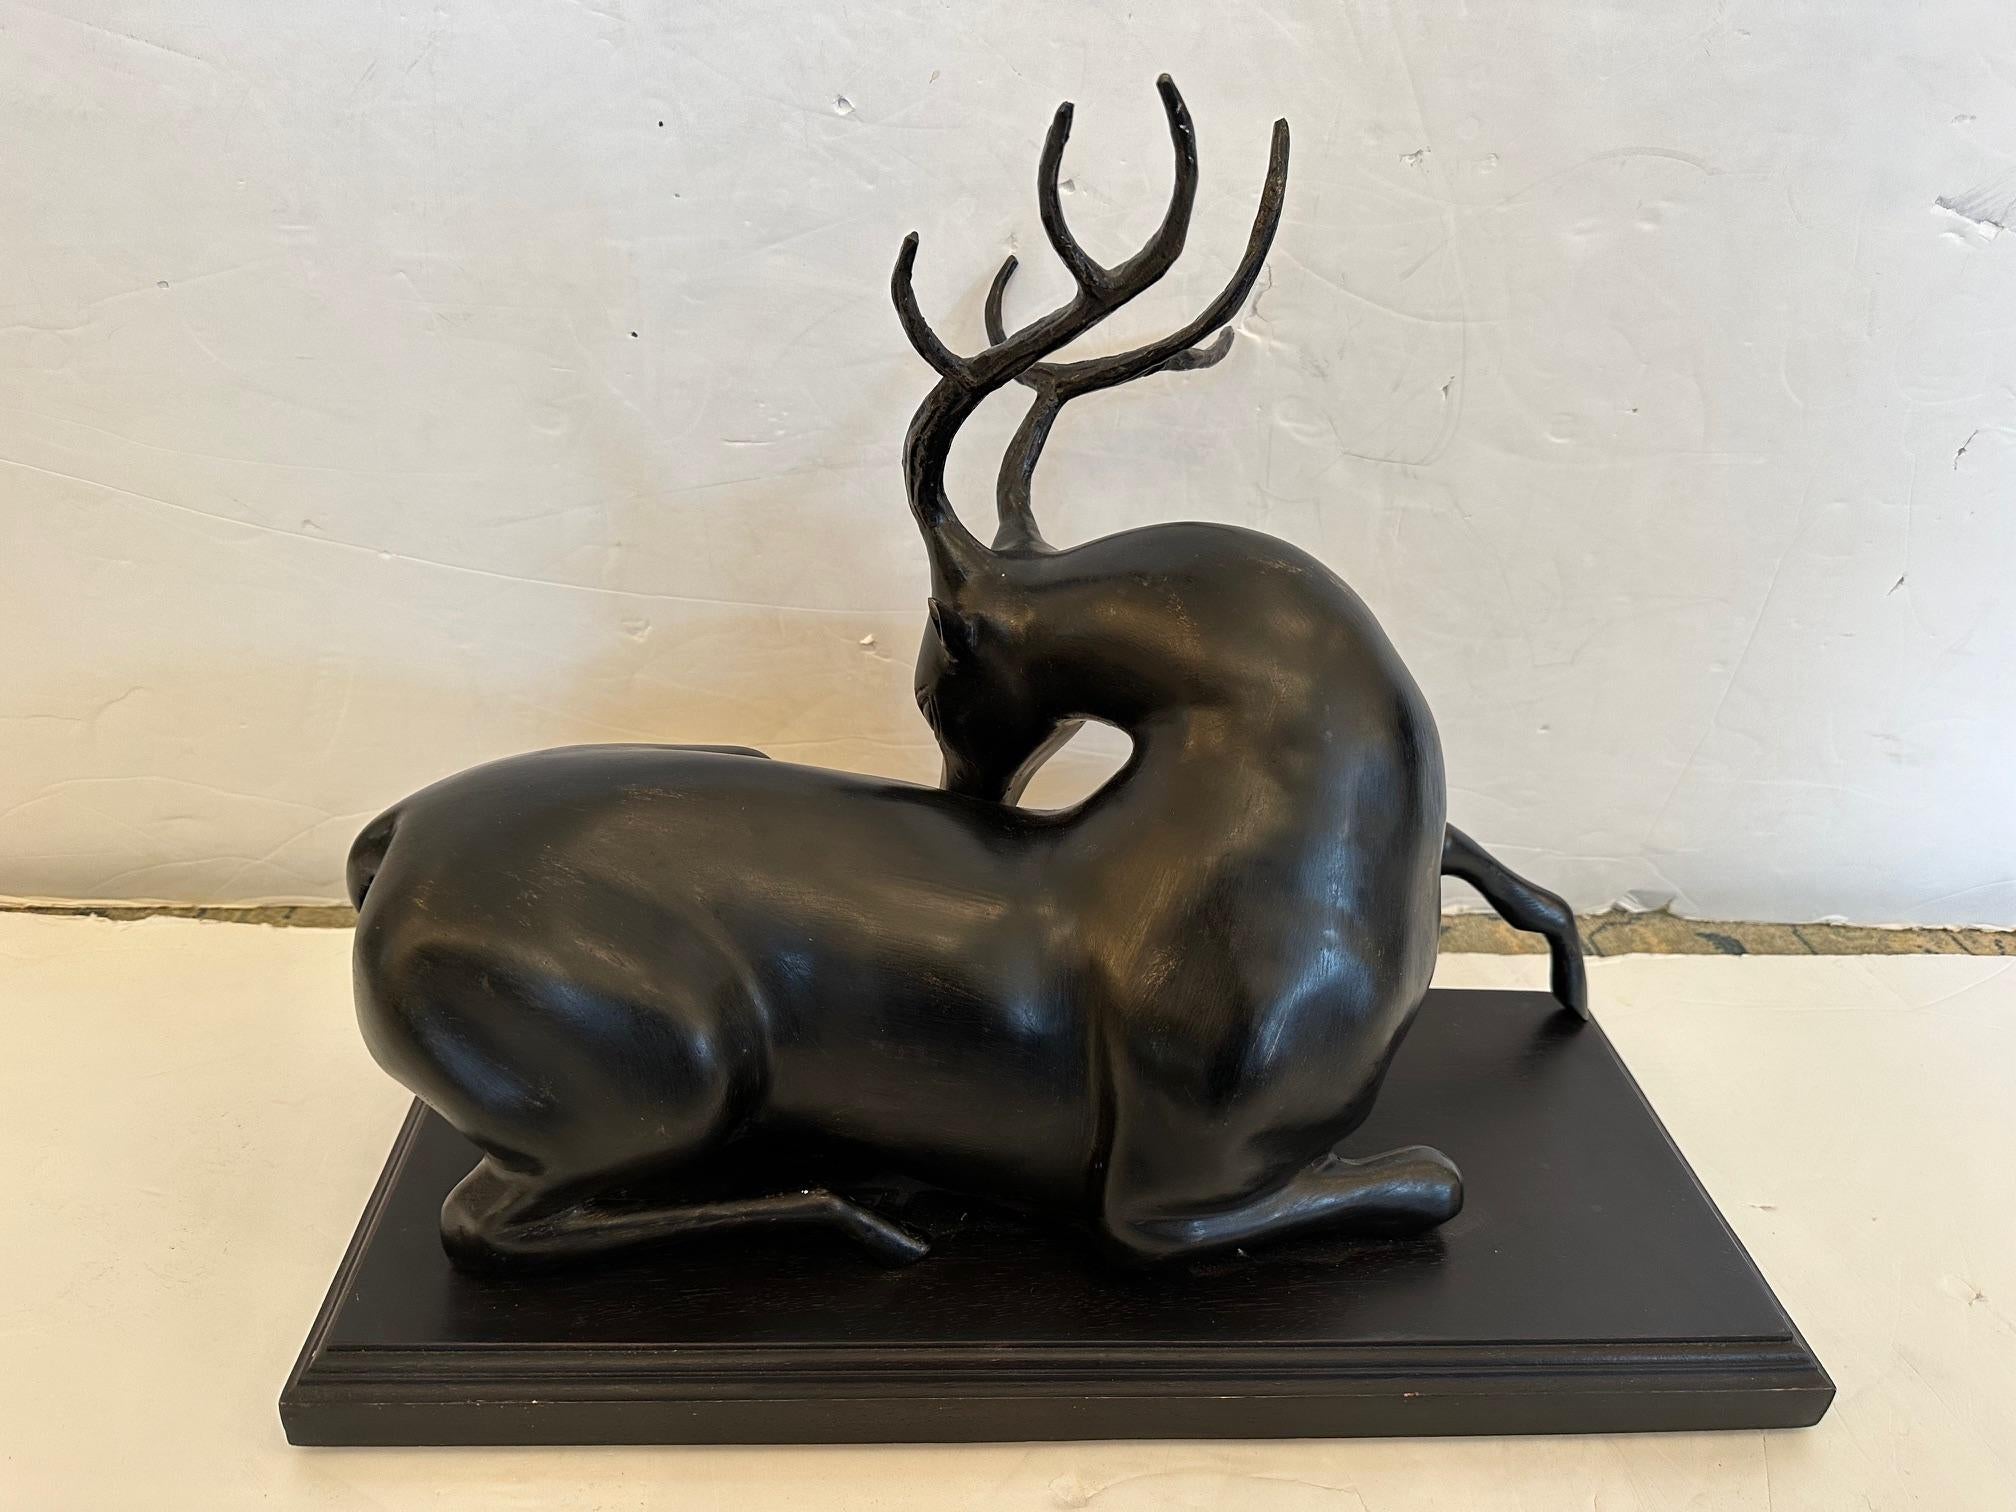 A beautiful gestural iron sculpture of a recumbent stag or deer with lovely outstretched leg.  Mounted on ebonized wood.